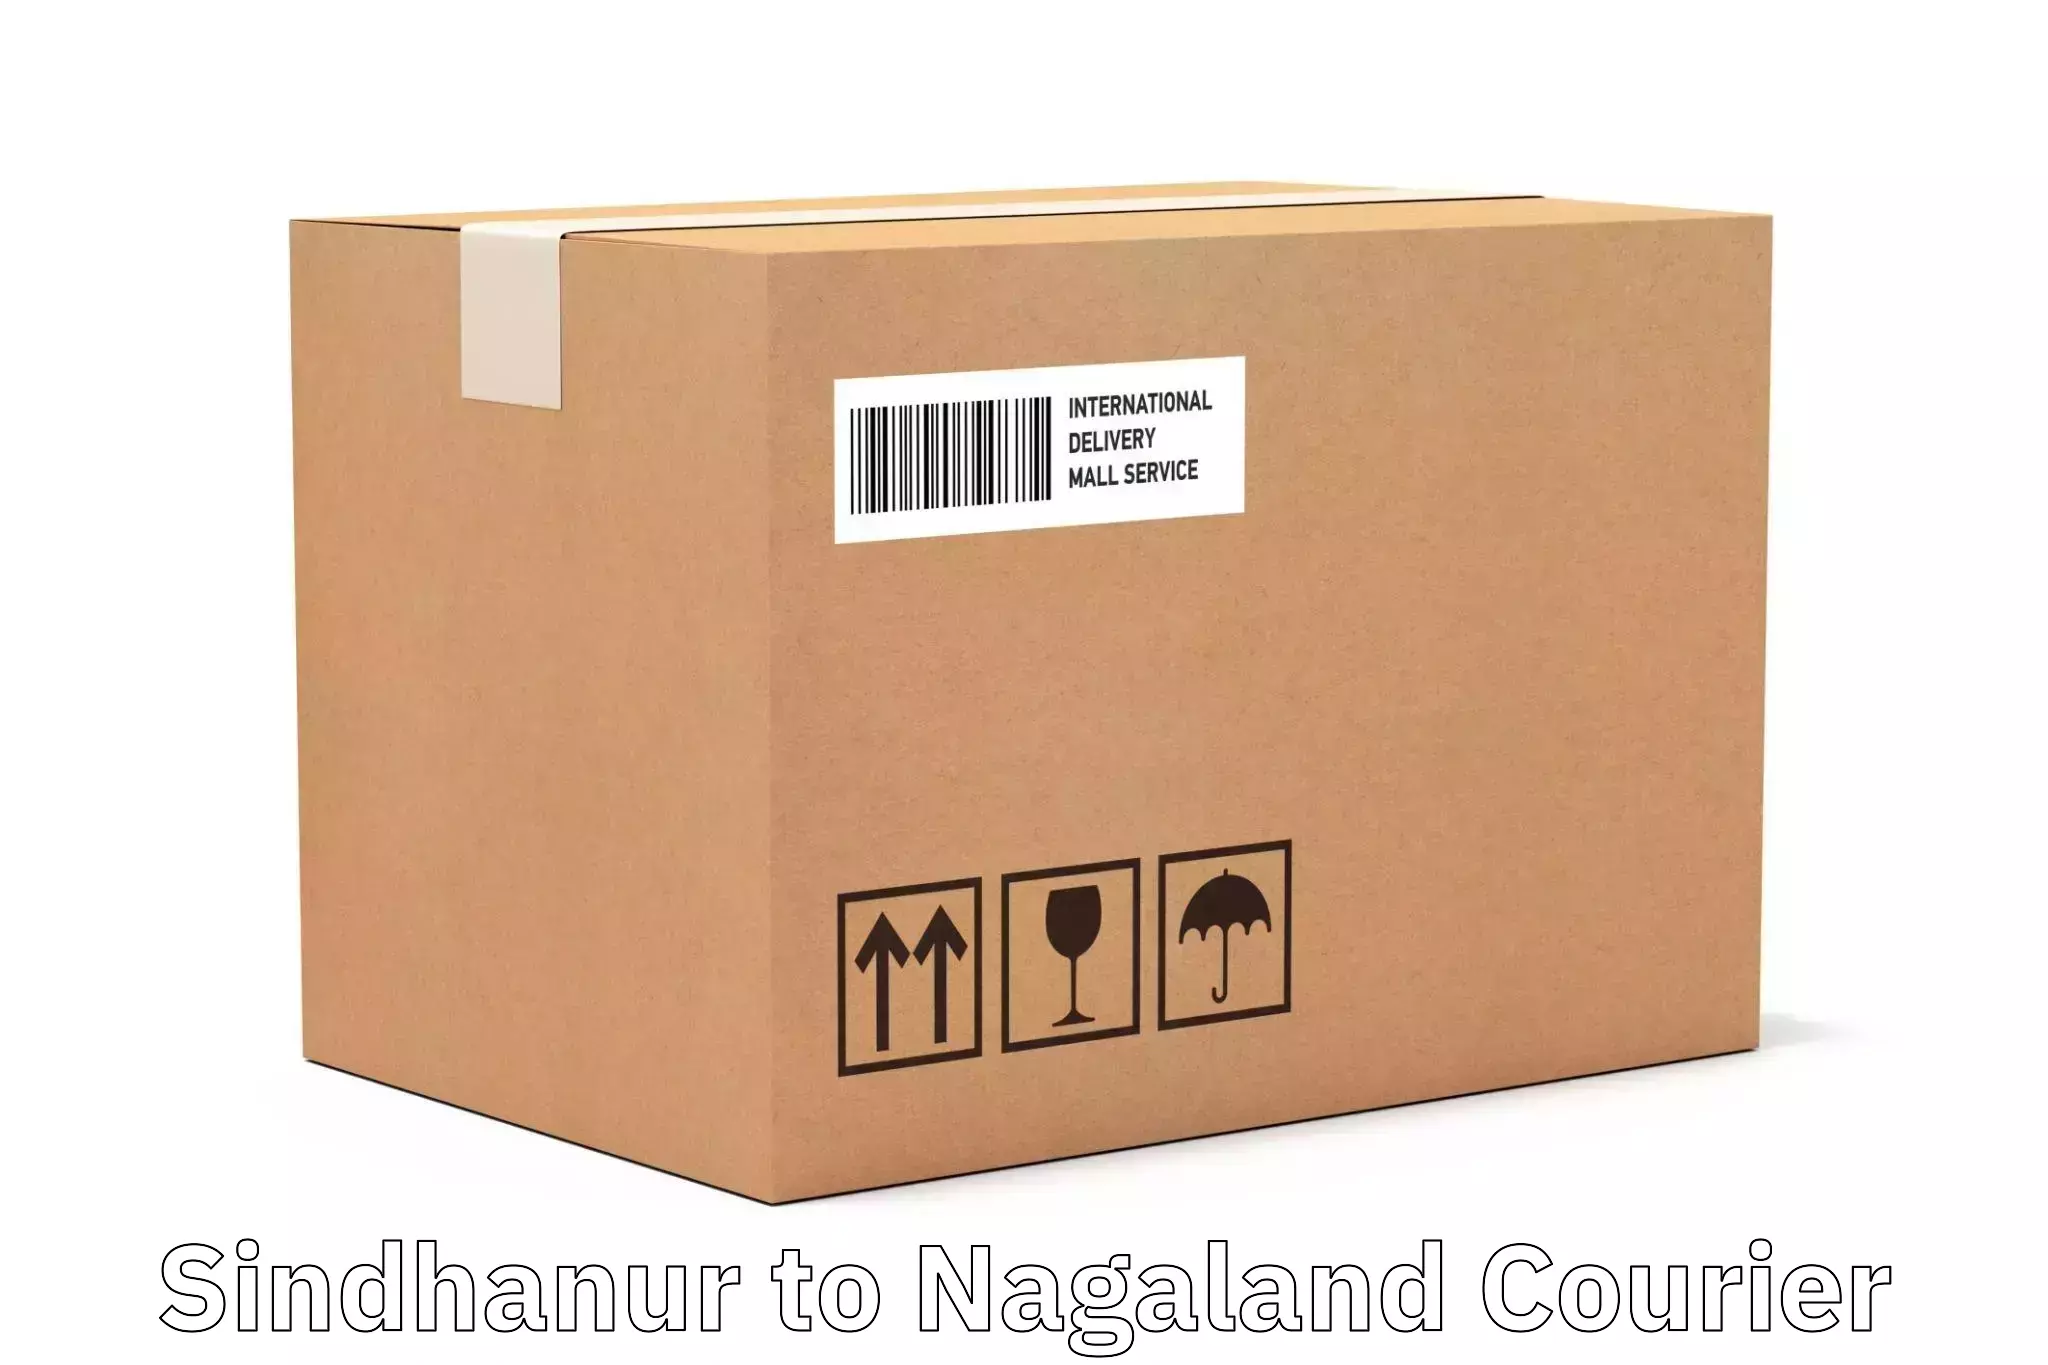 Sustainable shipping practices in Sindhanur to Nagaland